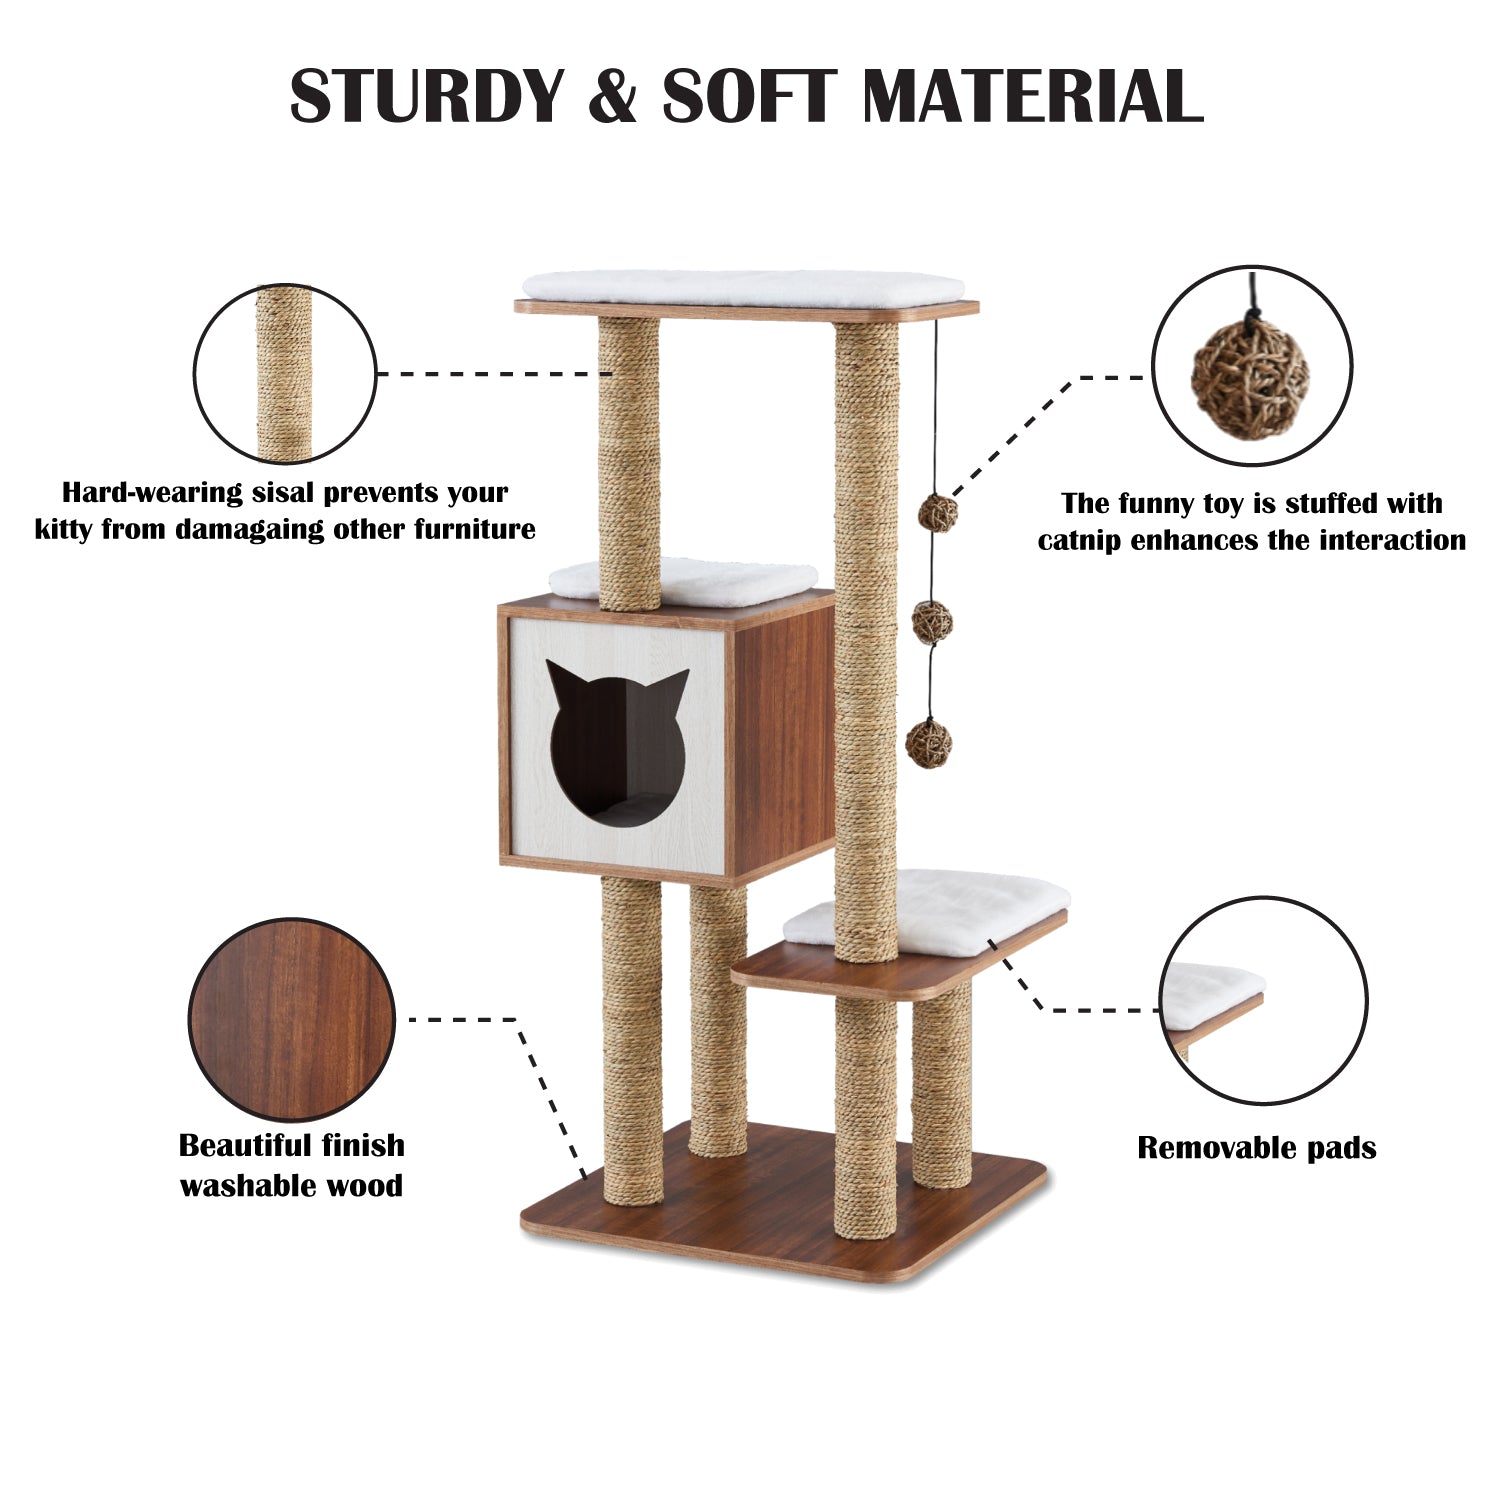 Big Up Pet Shop Elegant Wooden Modern Cat Tree Cat Condo Multi-Level Towers Cat Activity Tower with Scratching Posts, with Removable and Washable Mats (High Tower)